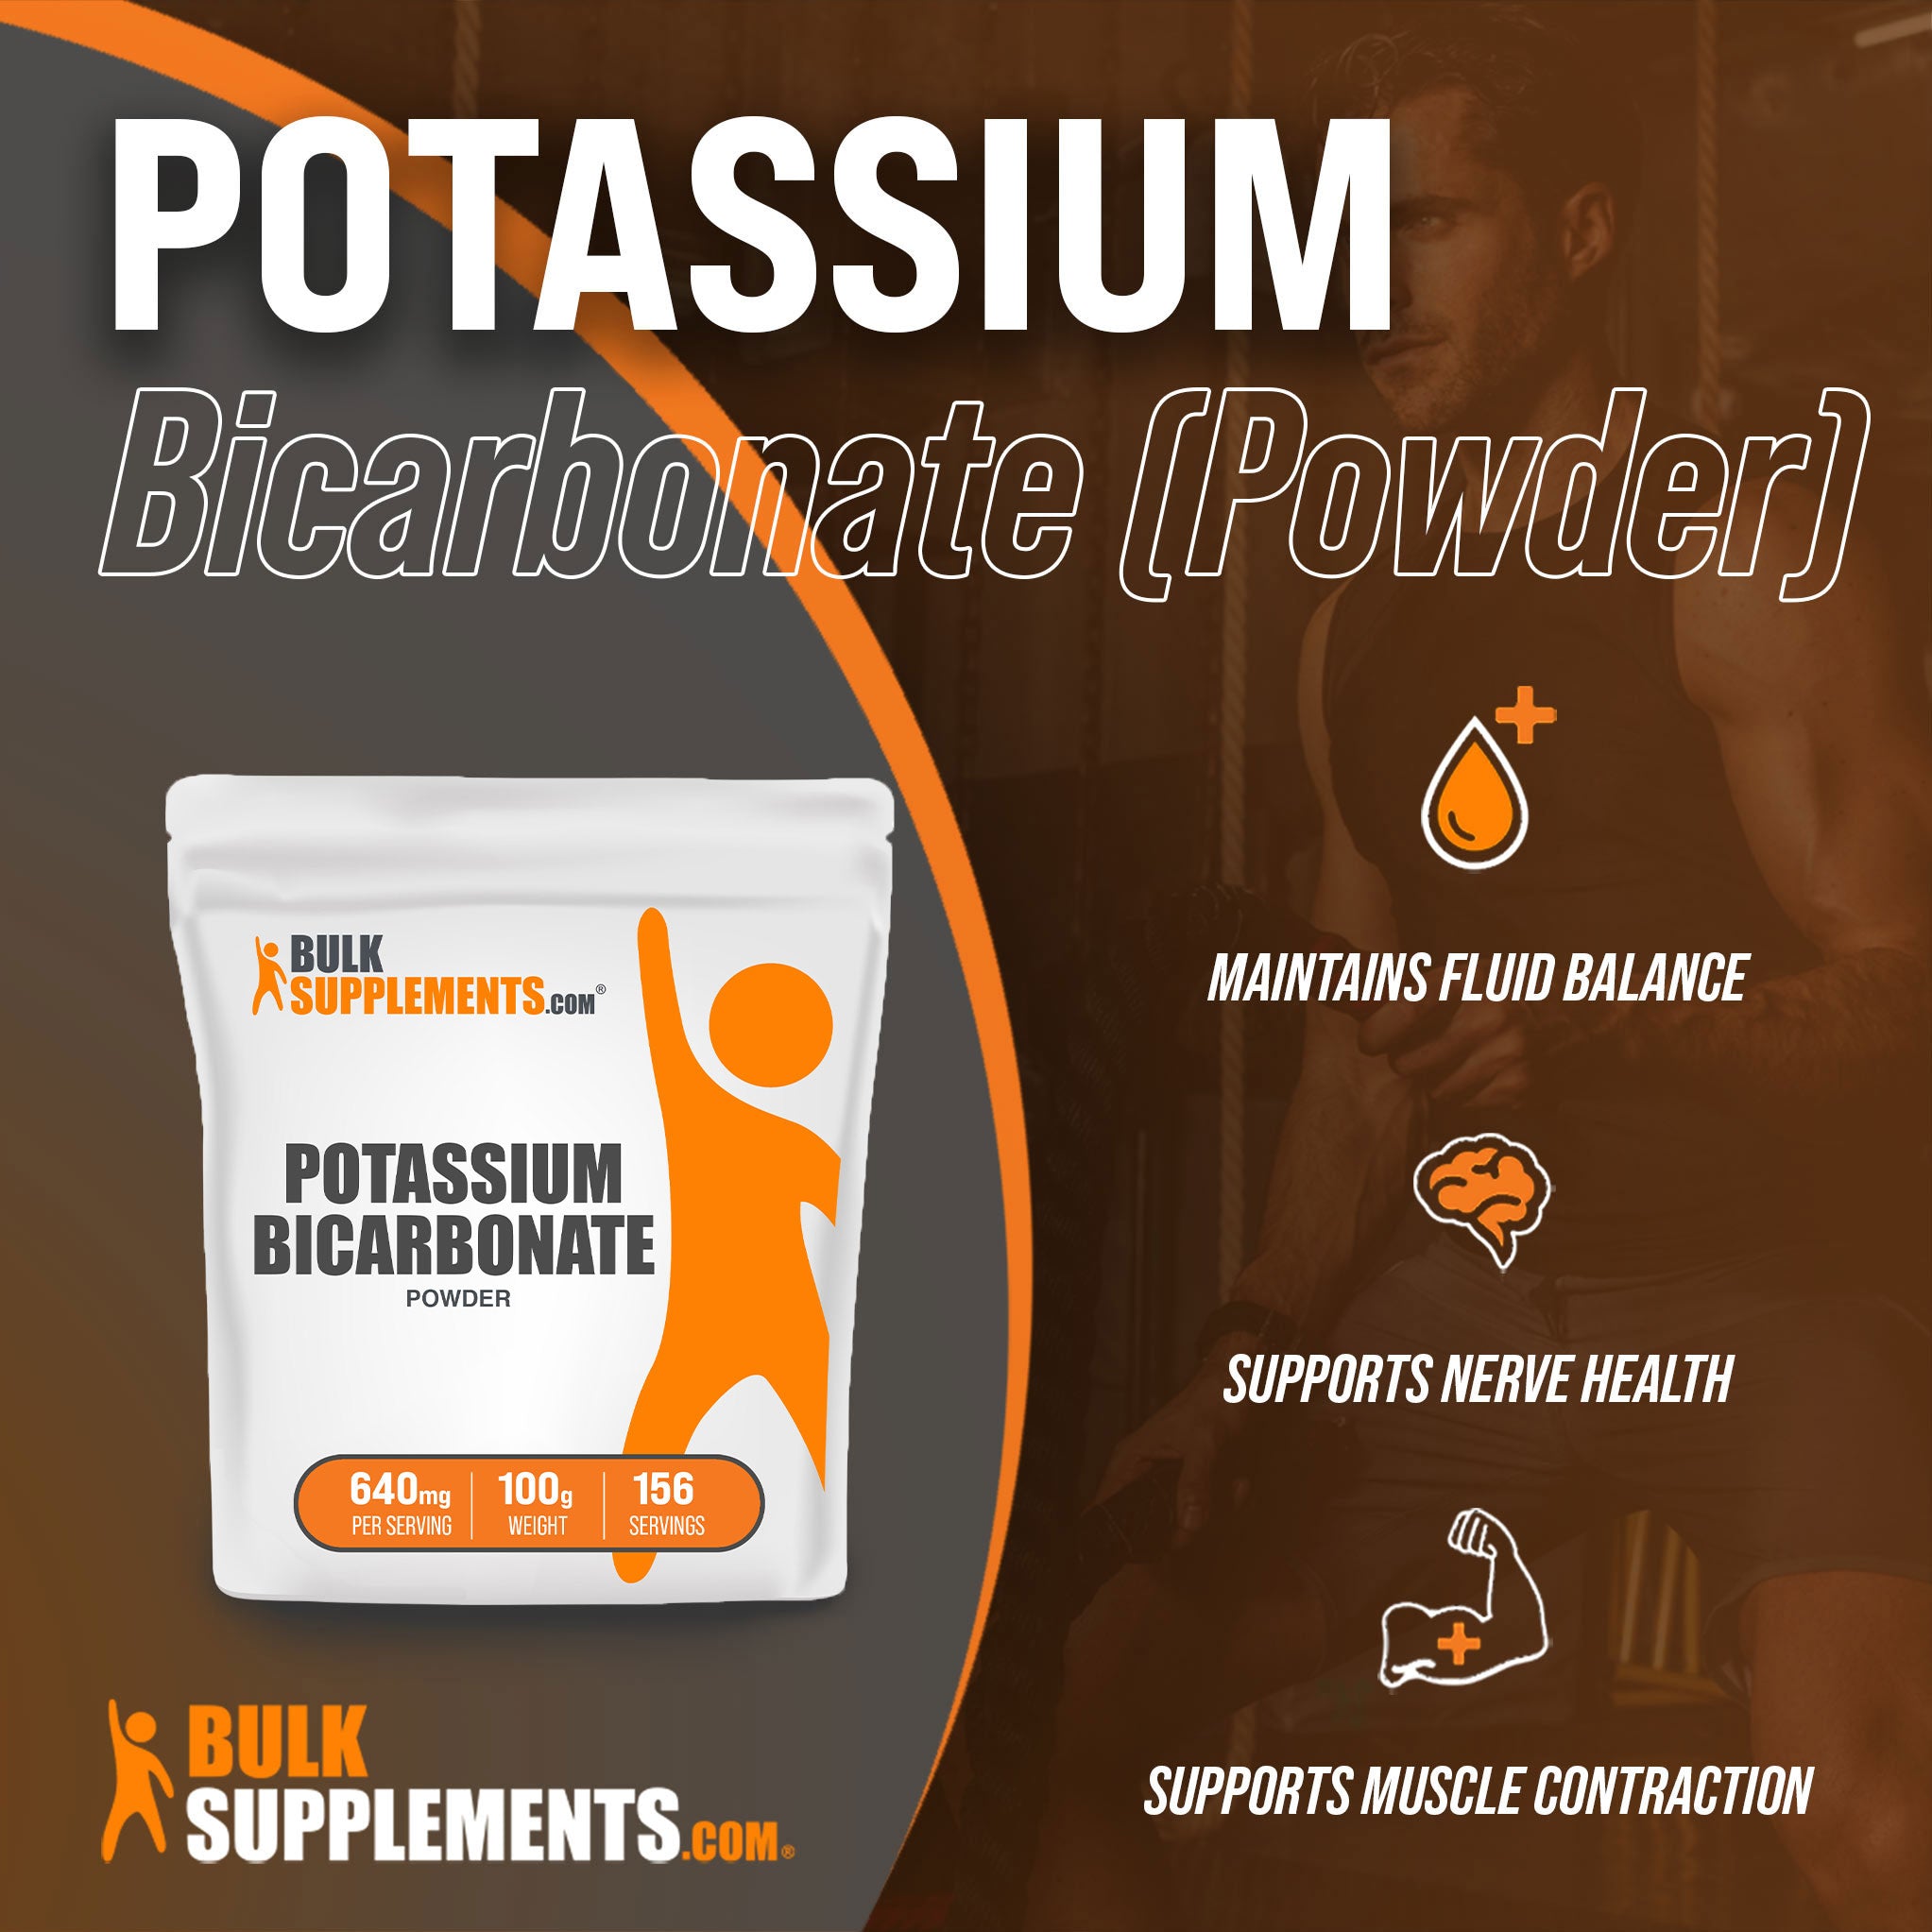 Benefits of Potassium Bicarbonate: maintains fluid balance, supports nerve health, supports muscle contraction